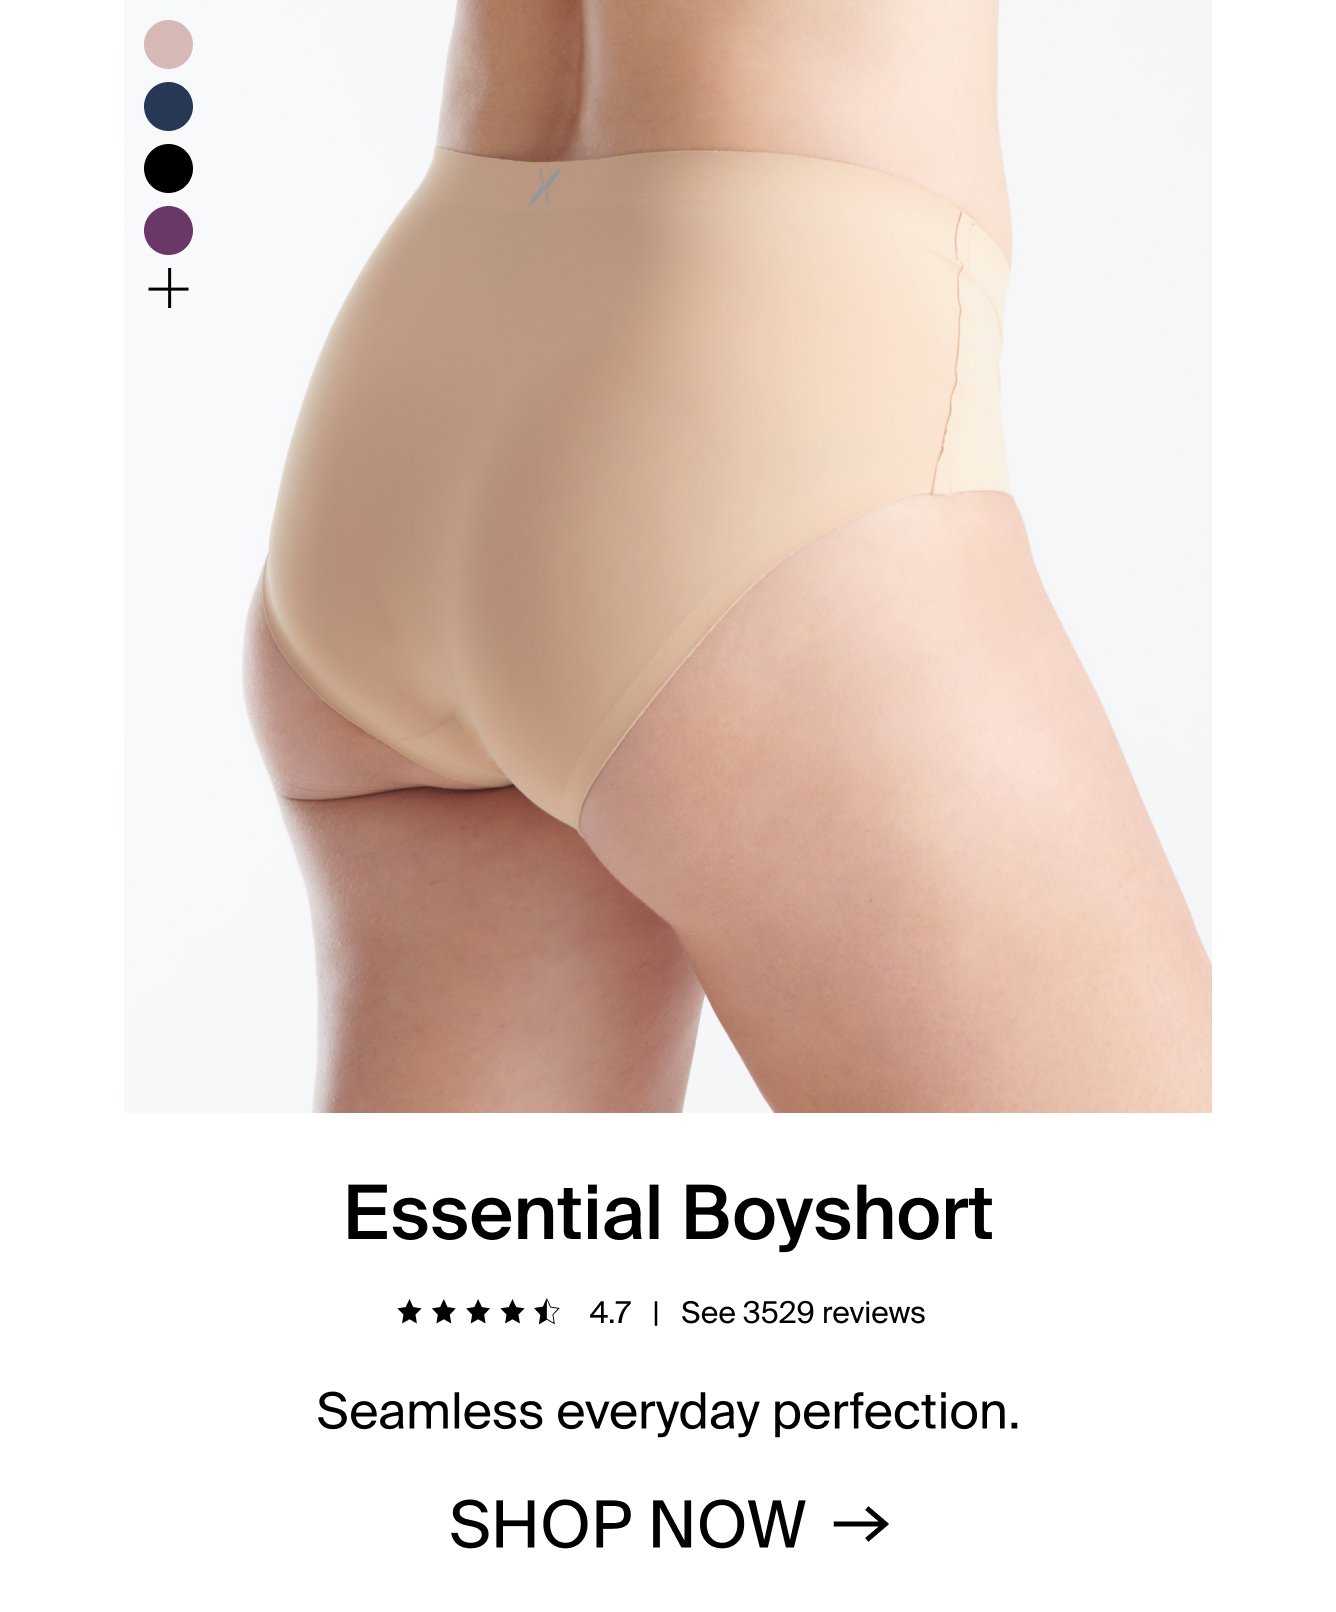 Essential boyshort. 4.7 stars. See 3529 reviews. Seamless everyday perfection. SHOP NOW.